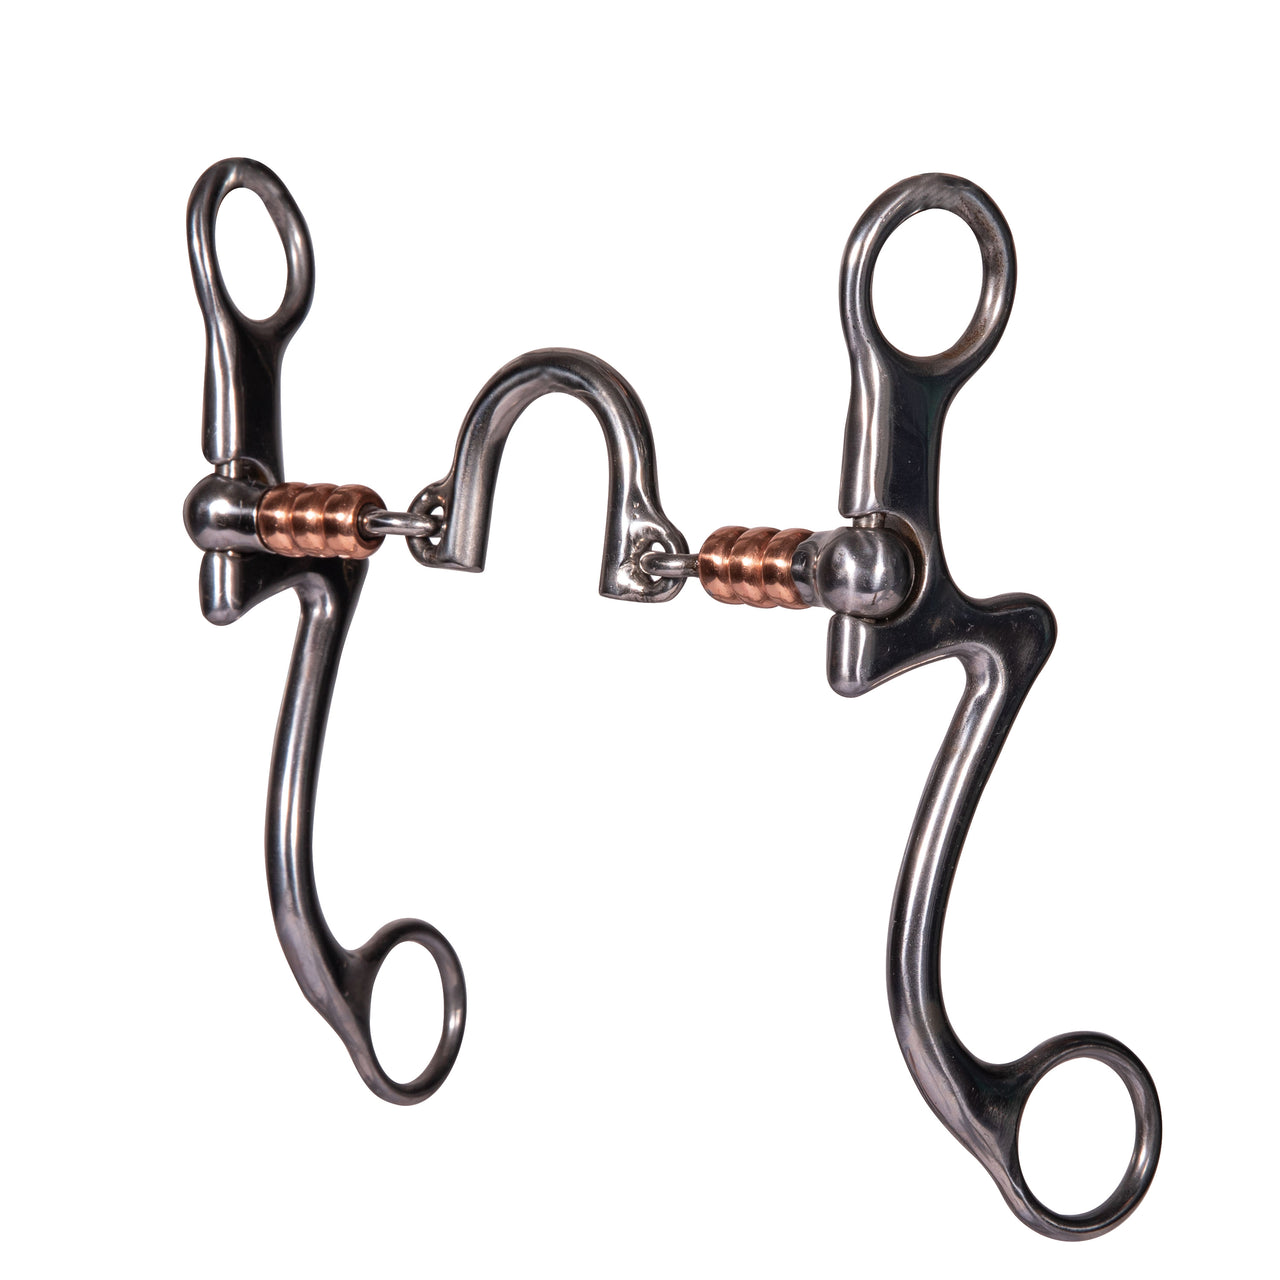 Professional's Choice 7 Shank Floating Port Loose Rings Bit